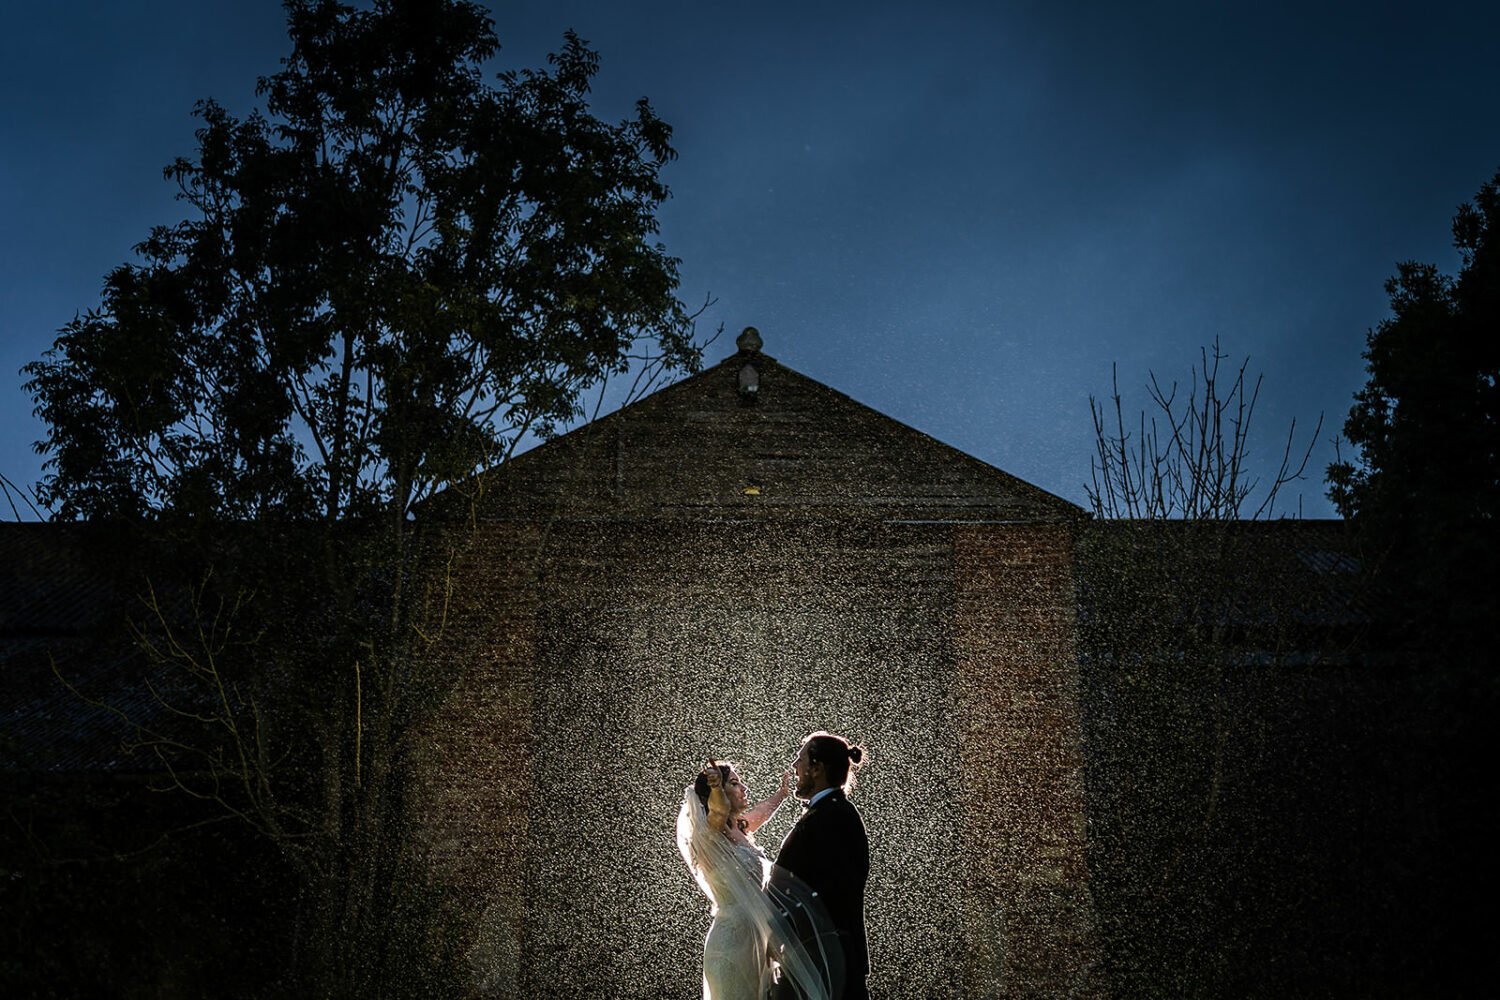 Fishley hall a couple portrait in front of the barn in heavy rain, it is evening and the couple are lit from behind by flash light. The rain drops sparkle.